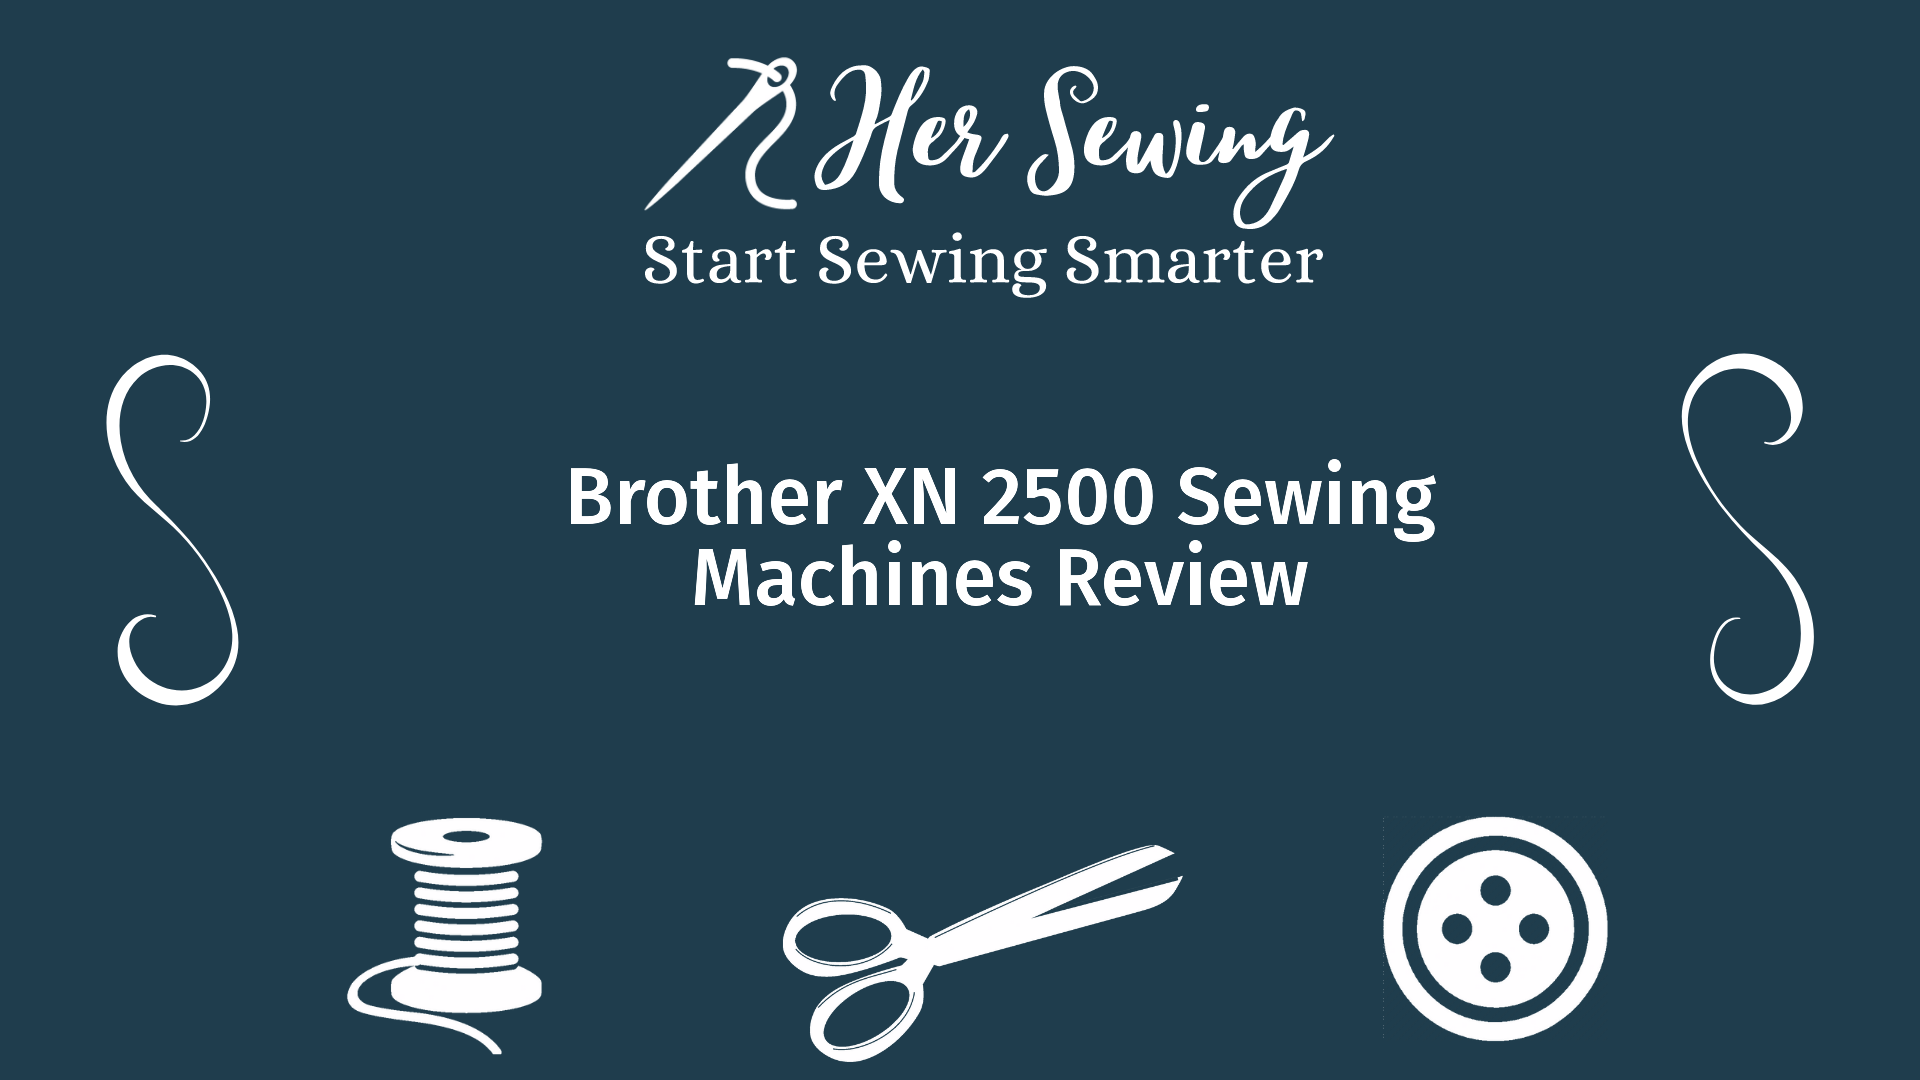 Brother XN 2500 Sewing Machines Review